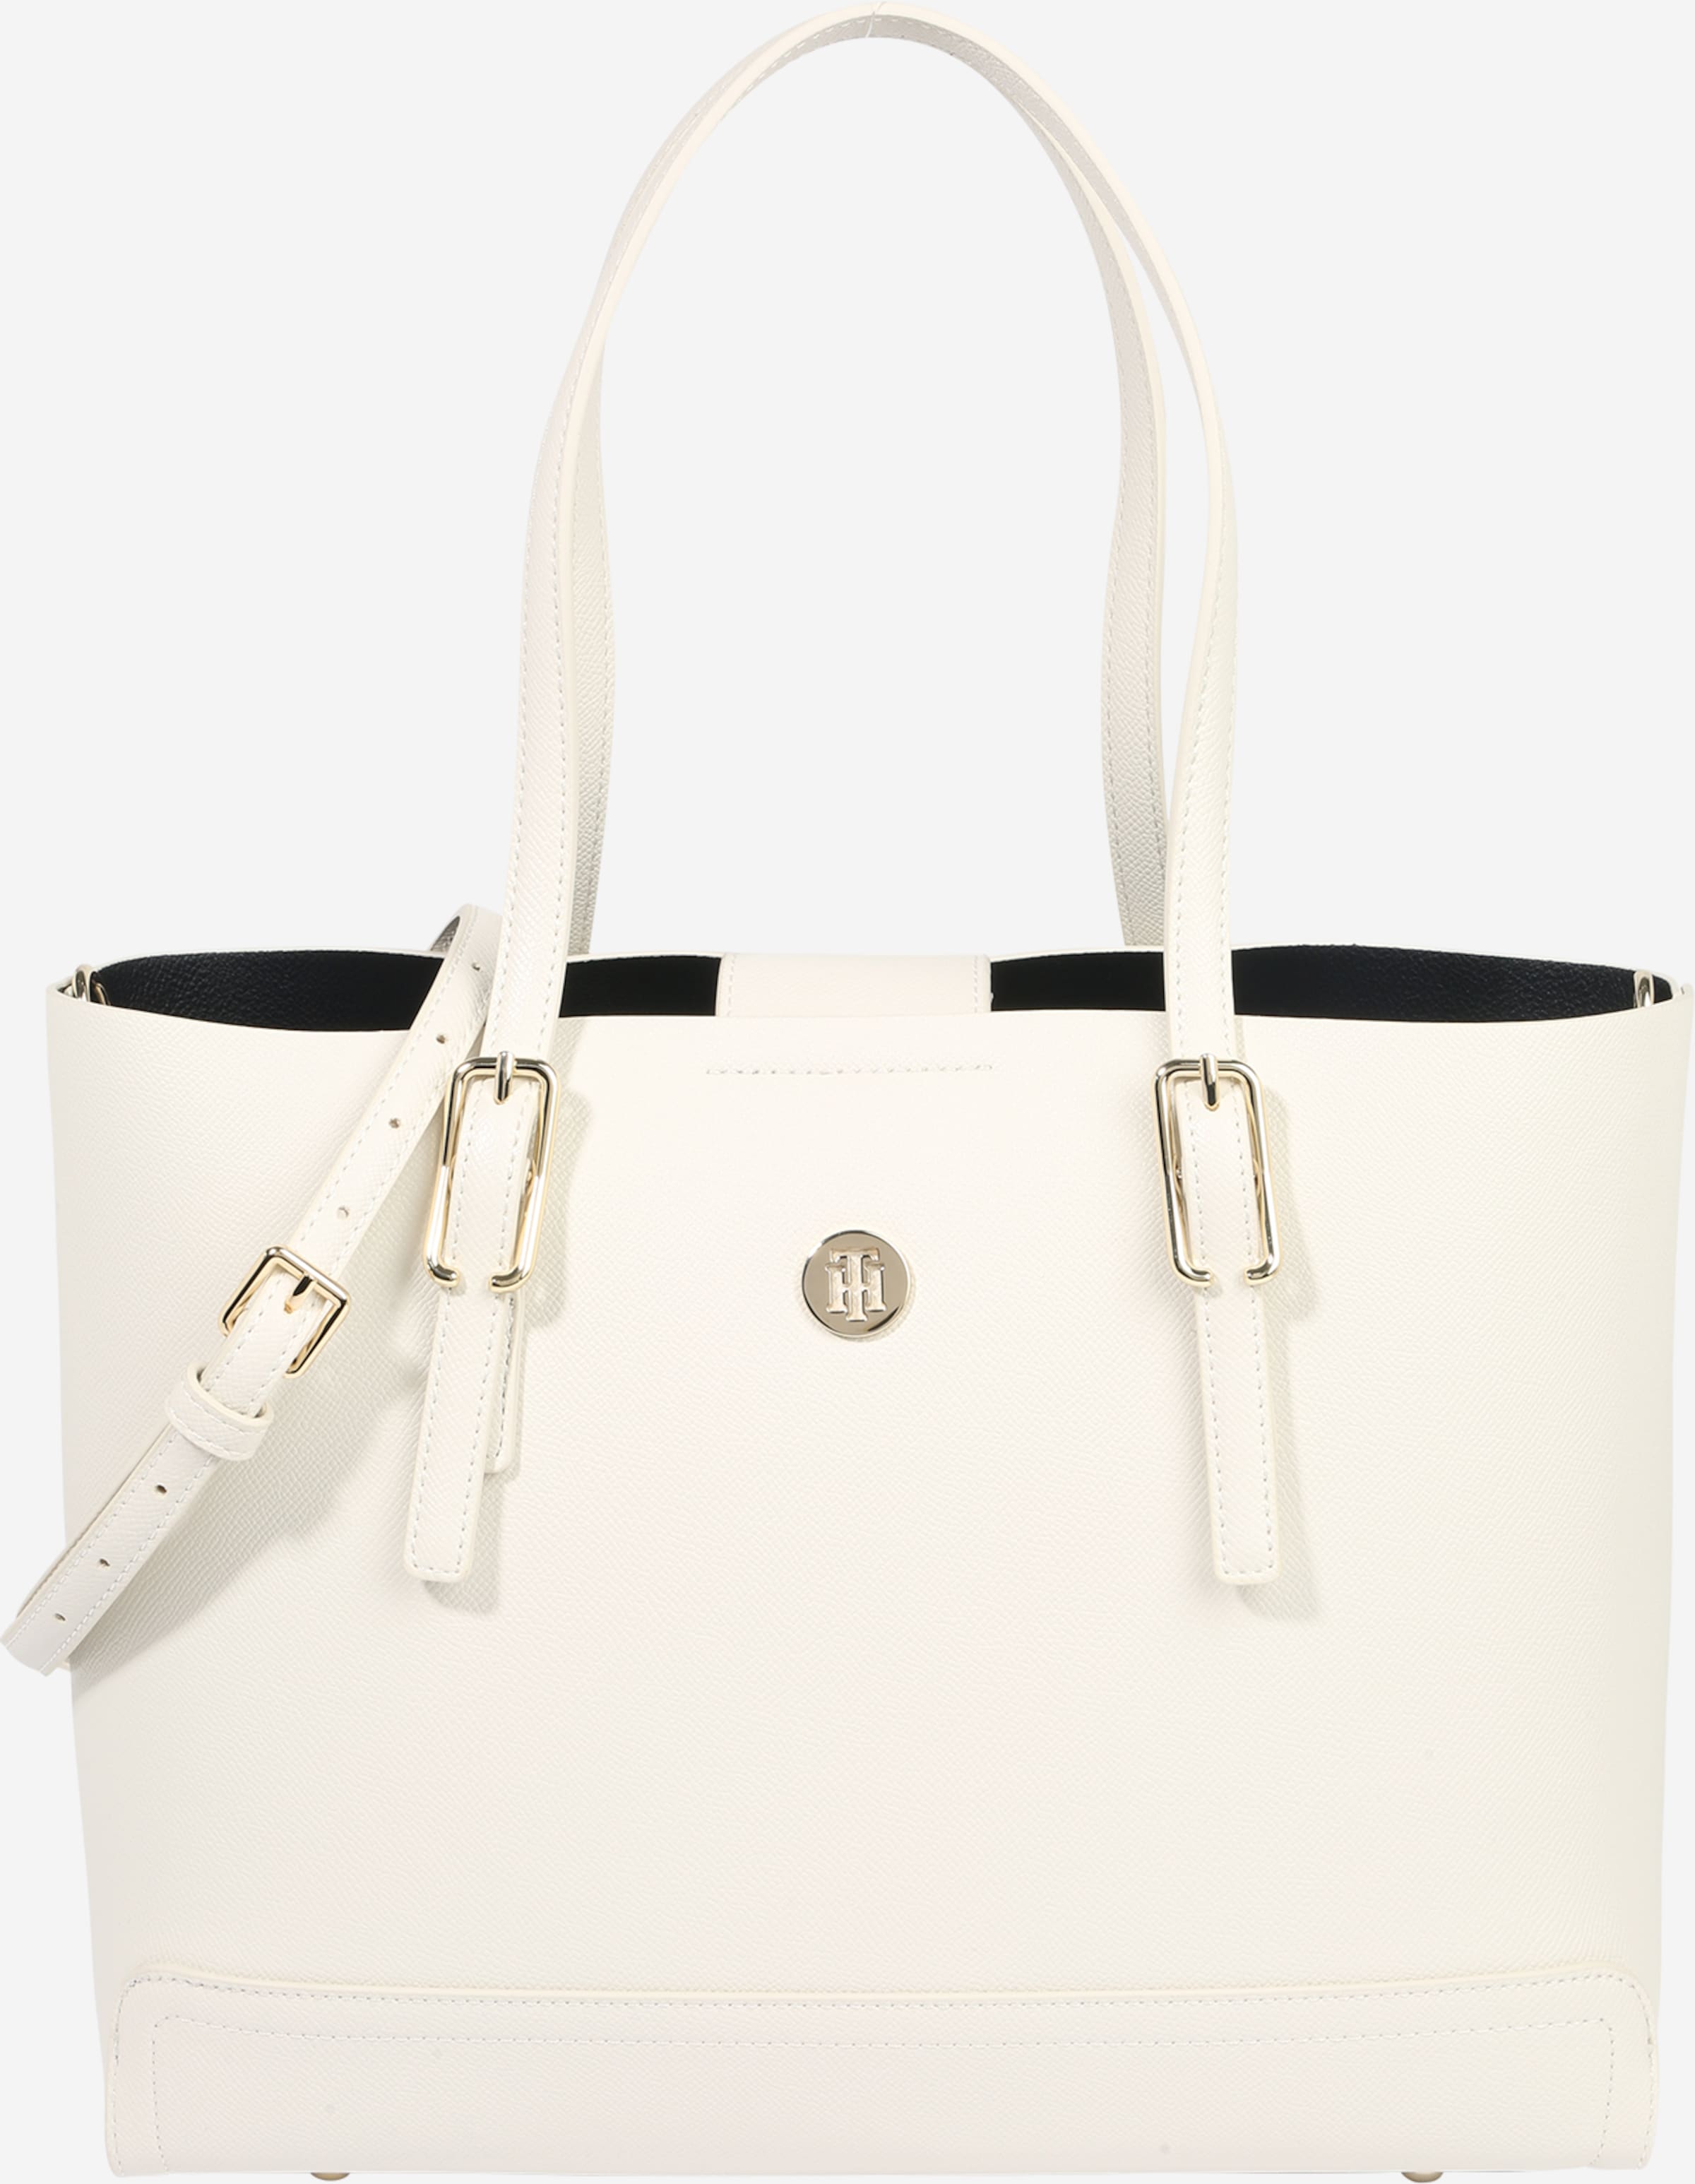 Lima Verpletteren Pennenvriend TOMMY HILFIGER Shopper 'Honey' in White | ABOUT YOU